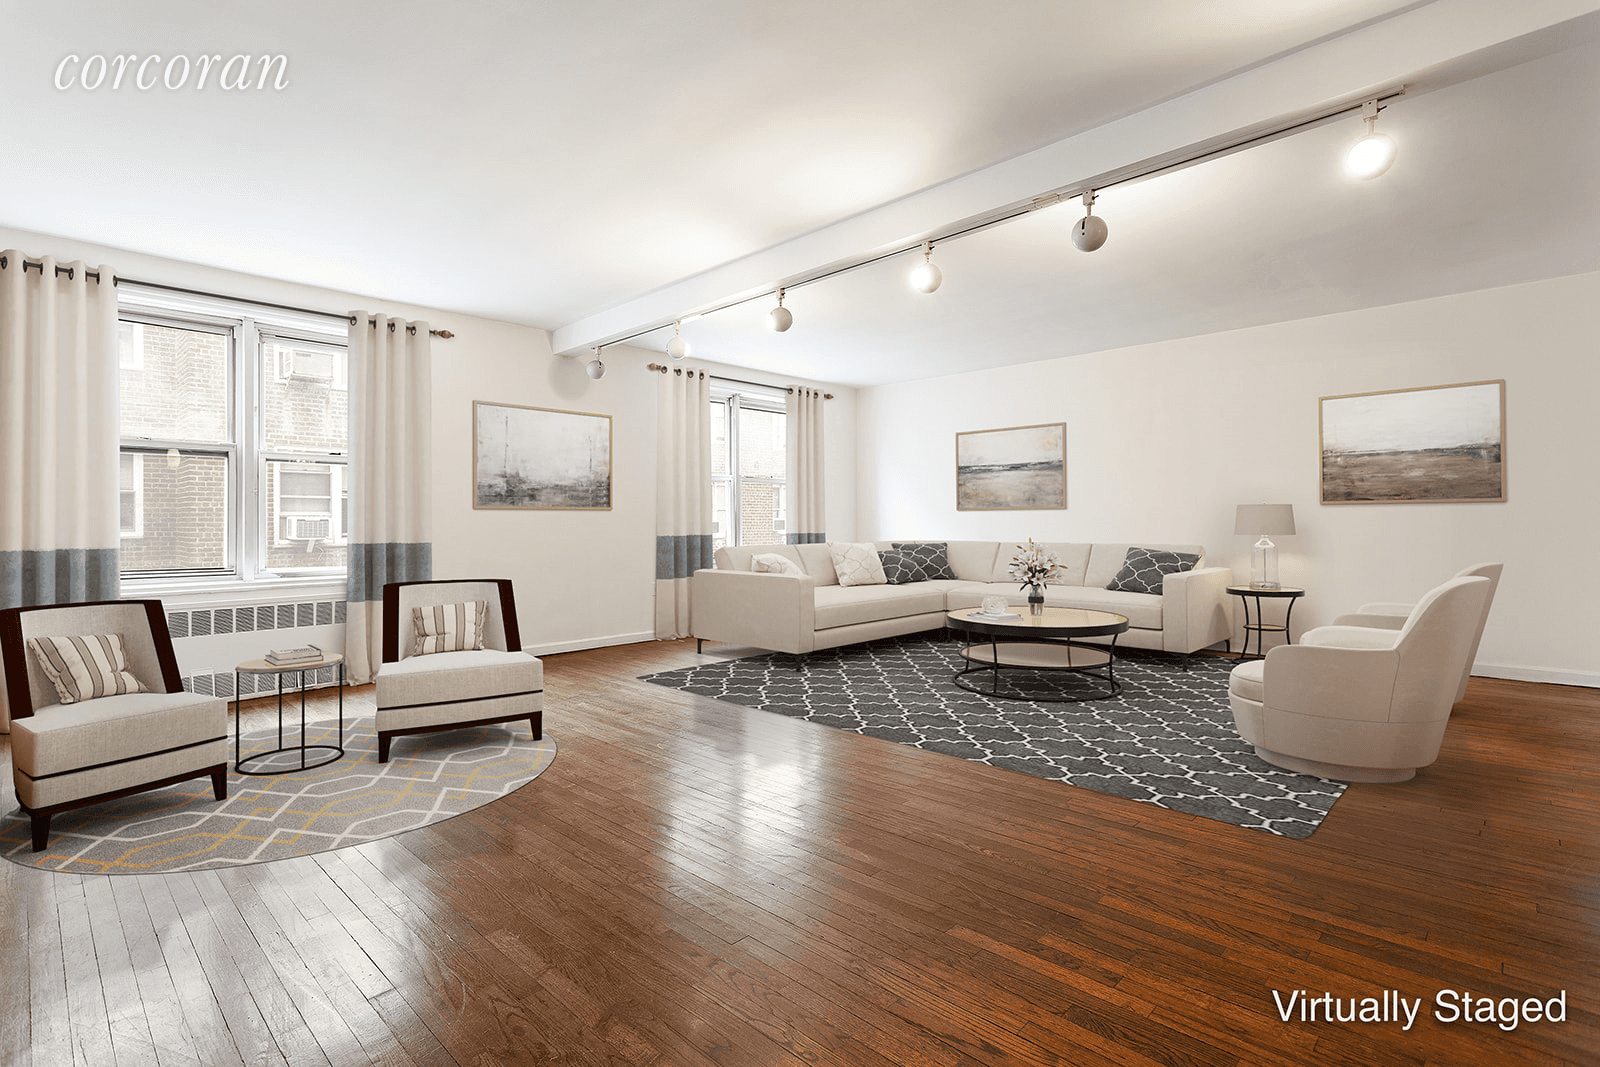 This luxurious FOUR bedroom, two bathroom apartment with PARKING has over 1, 860 square feet of comfortable living space in a convenient section of the Midwood neighborhood of Brooklyn.